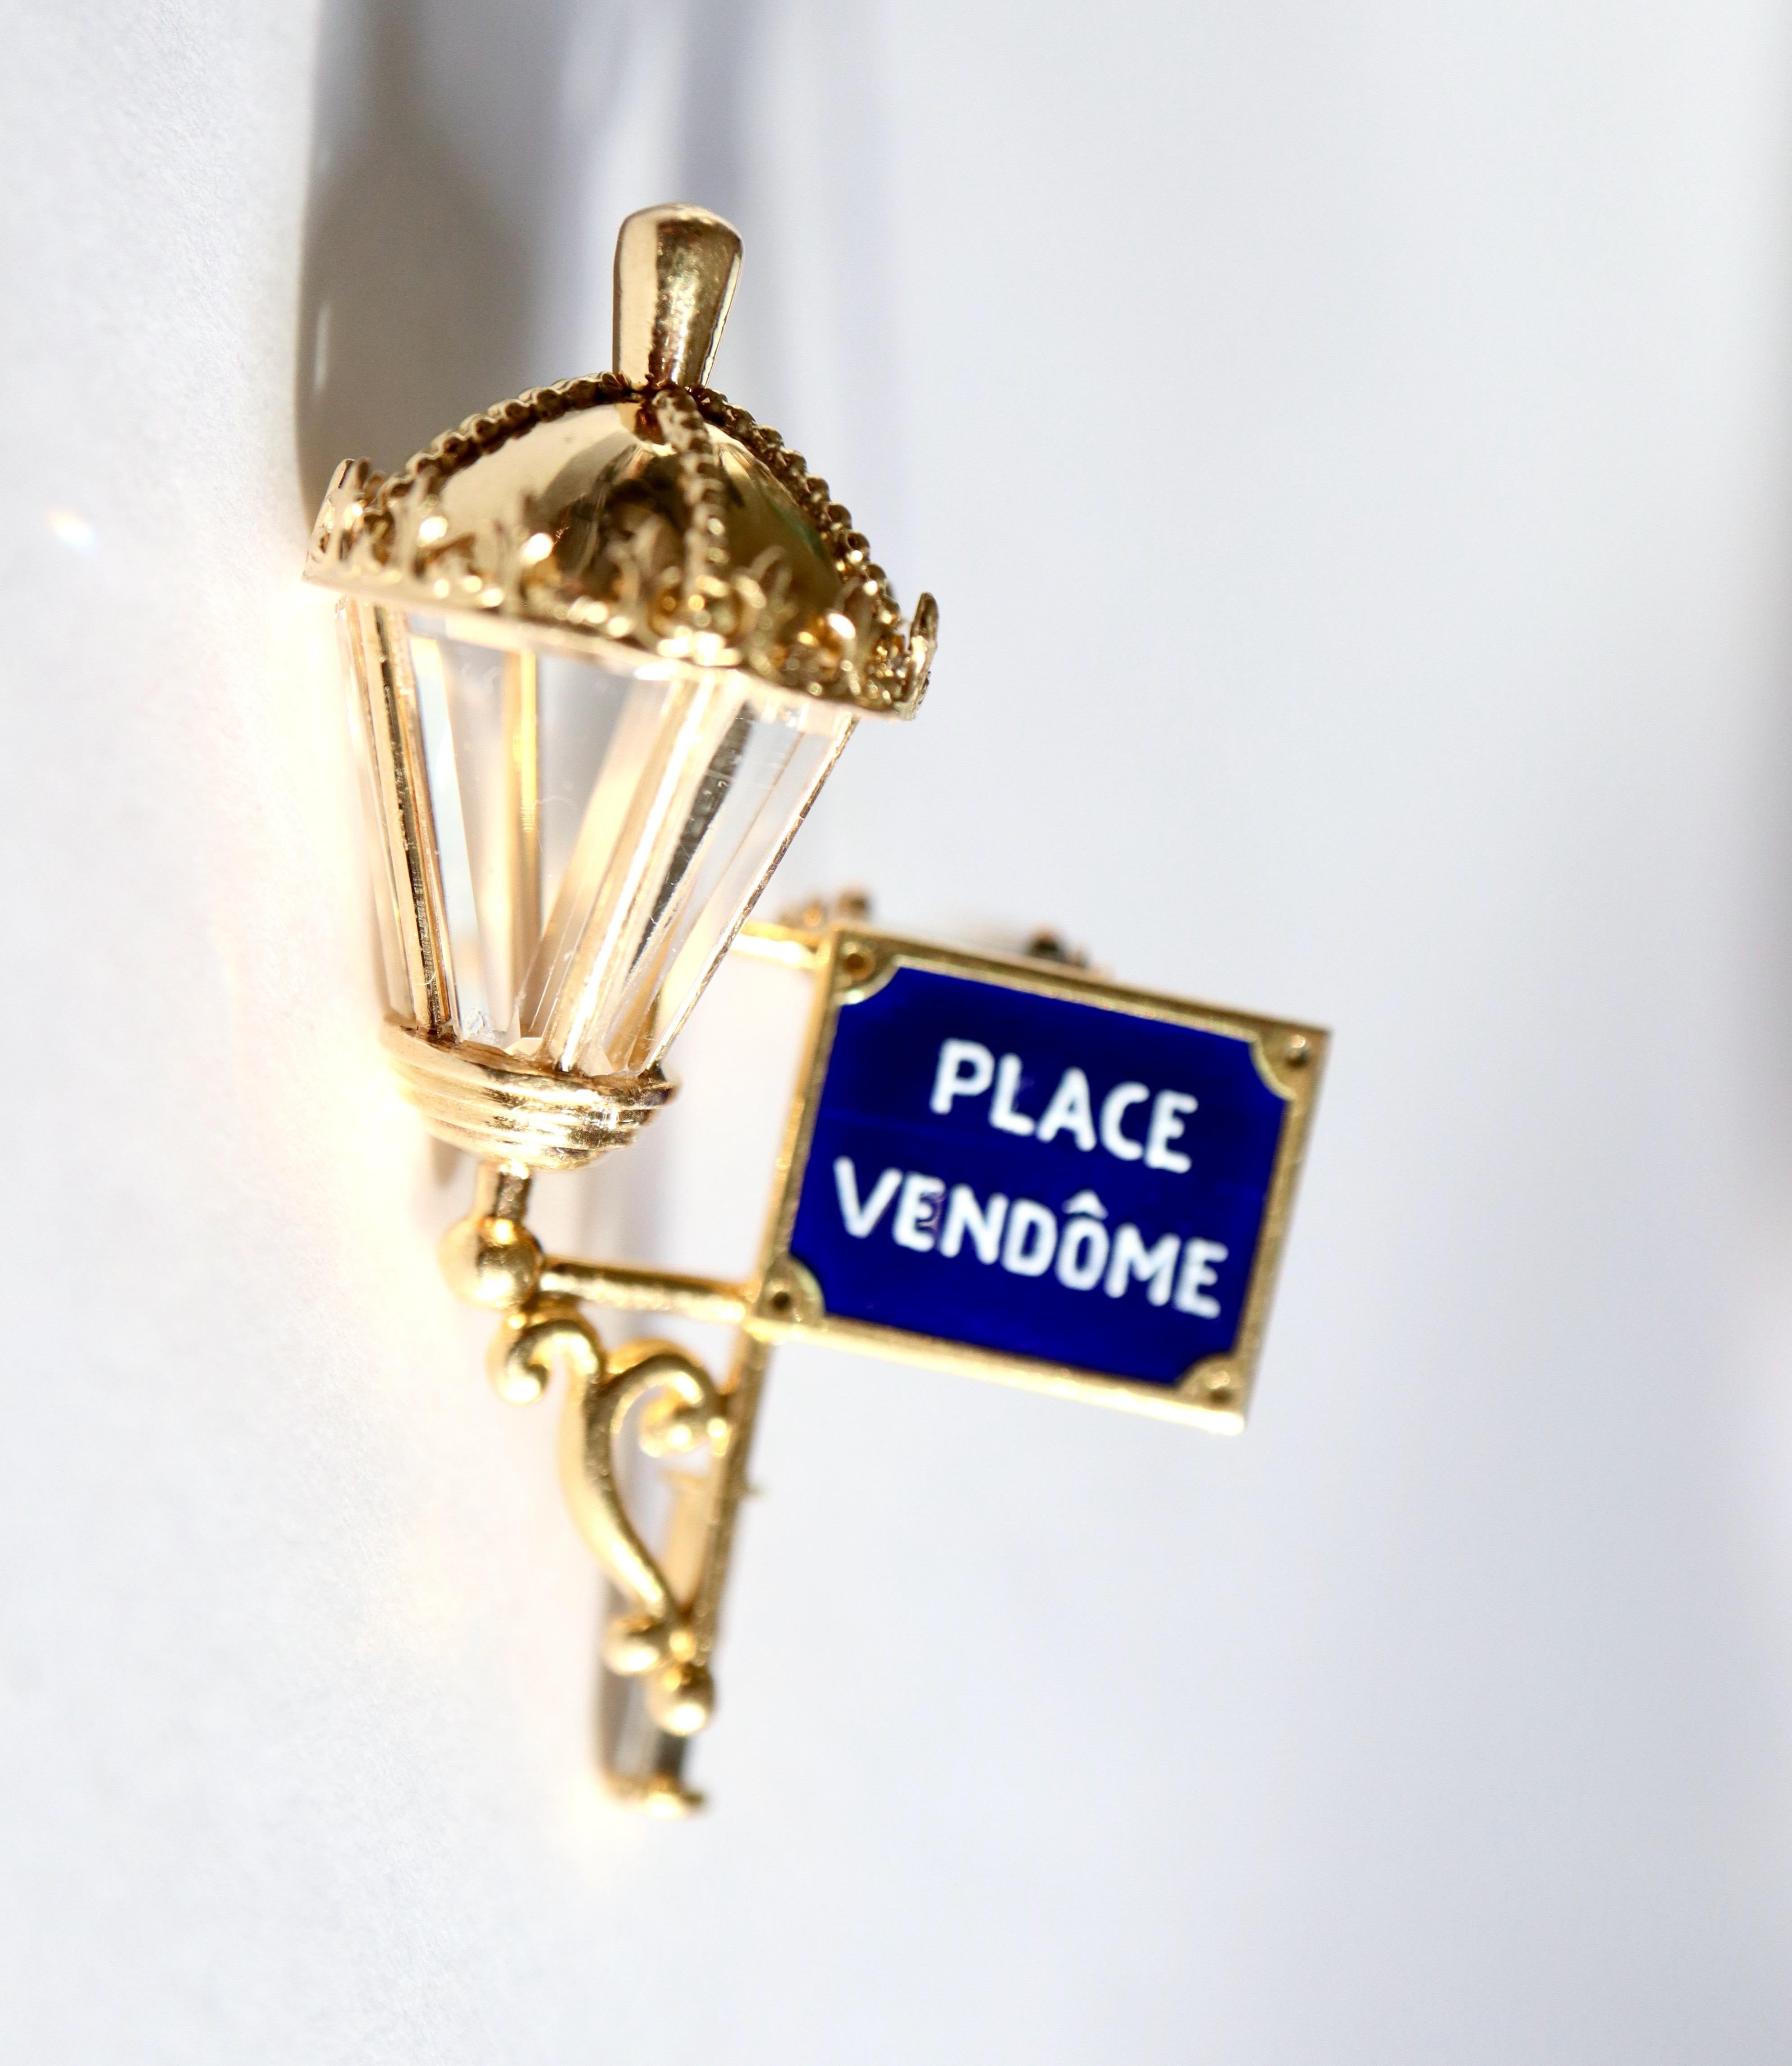 MAUBOUSSIN Place Vendôme Lapel Clip in 18 Carat yellow Gold and Enamel around 1950
Maison MAUBOUSSIN Brooch in 18 Kt yellow Gold depicting a Lantern with the Plaque of Place Vendome Enamelled in White on a Blue Background. Original beveled Crystal